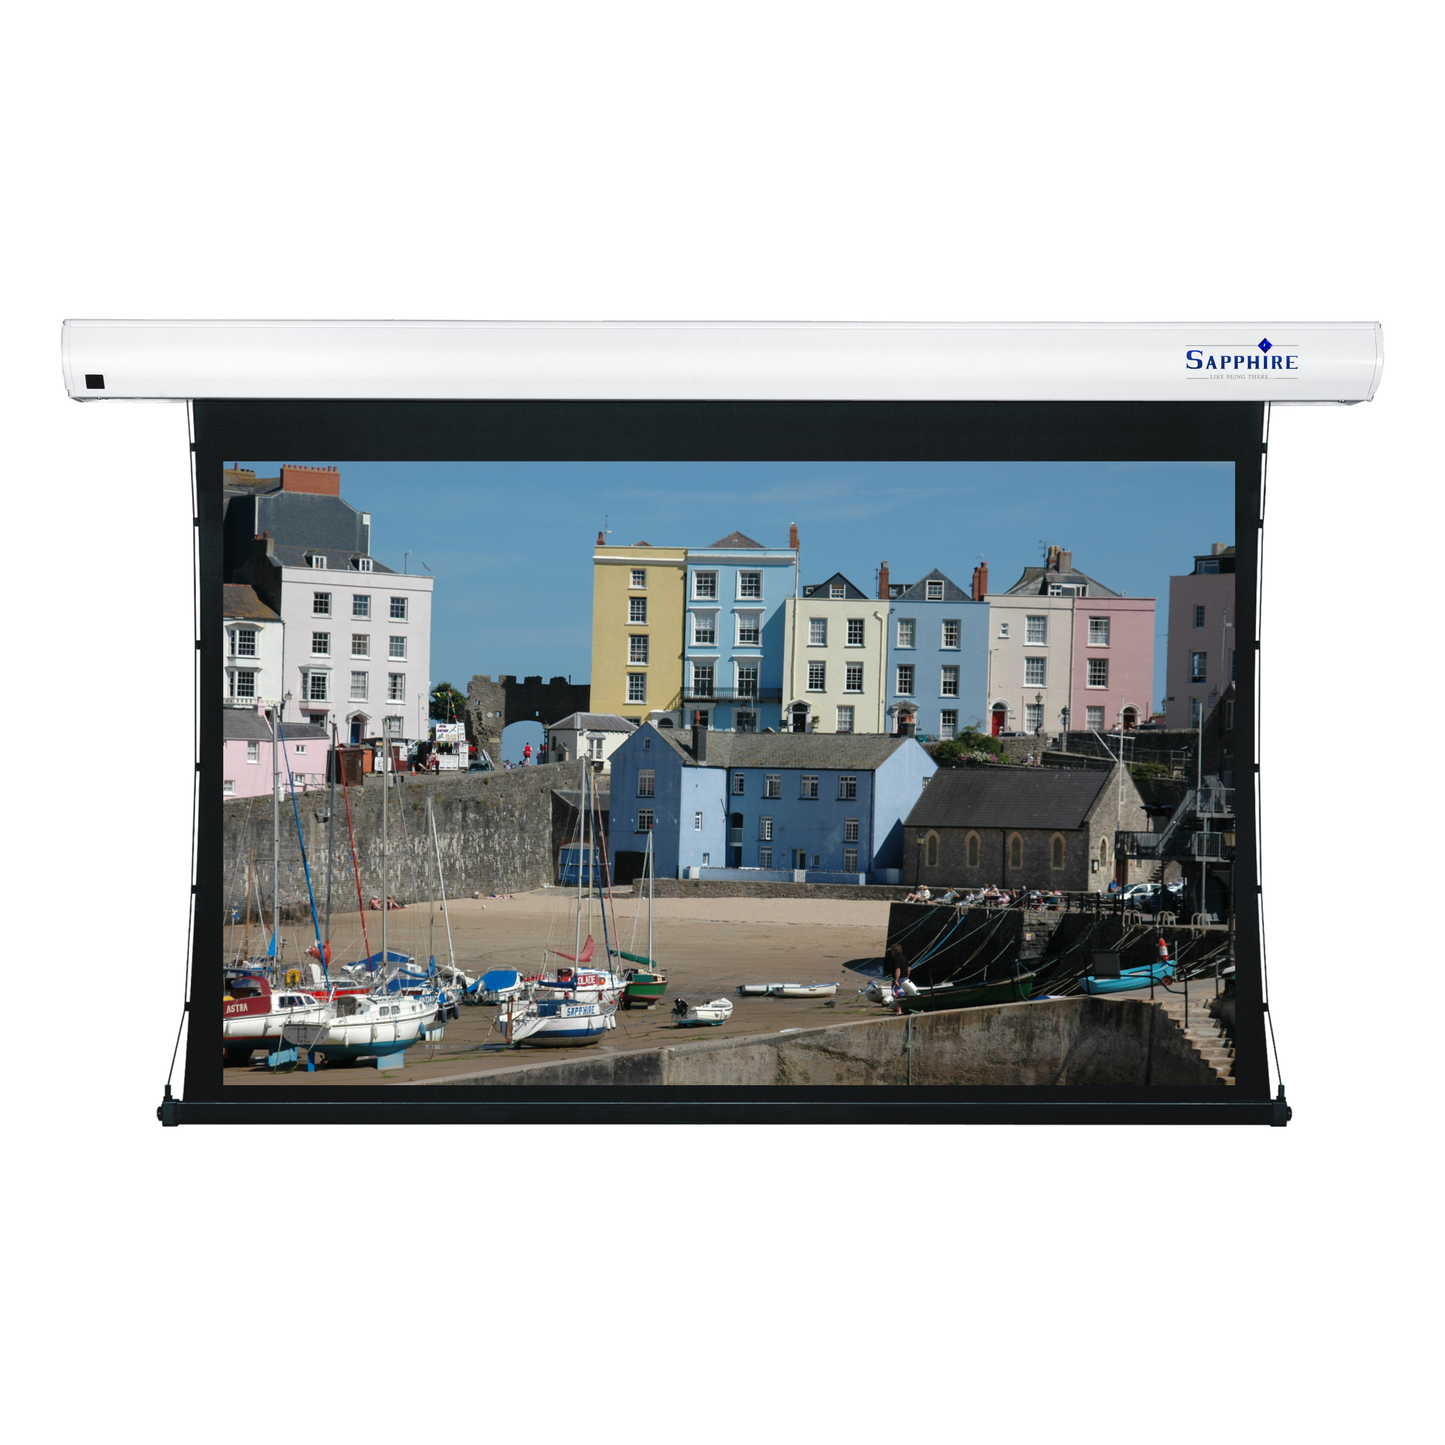 Sapphire Tab Tension Electric REAR Projection Infra Red Screen 16:10 Format Viewing Area 2346mm x 1466mm Approx Case Dimensions L 2834mm x H 134mm x D 135mm